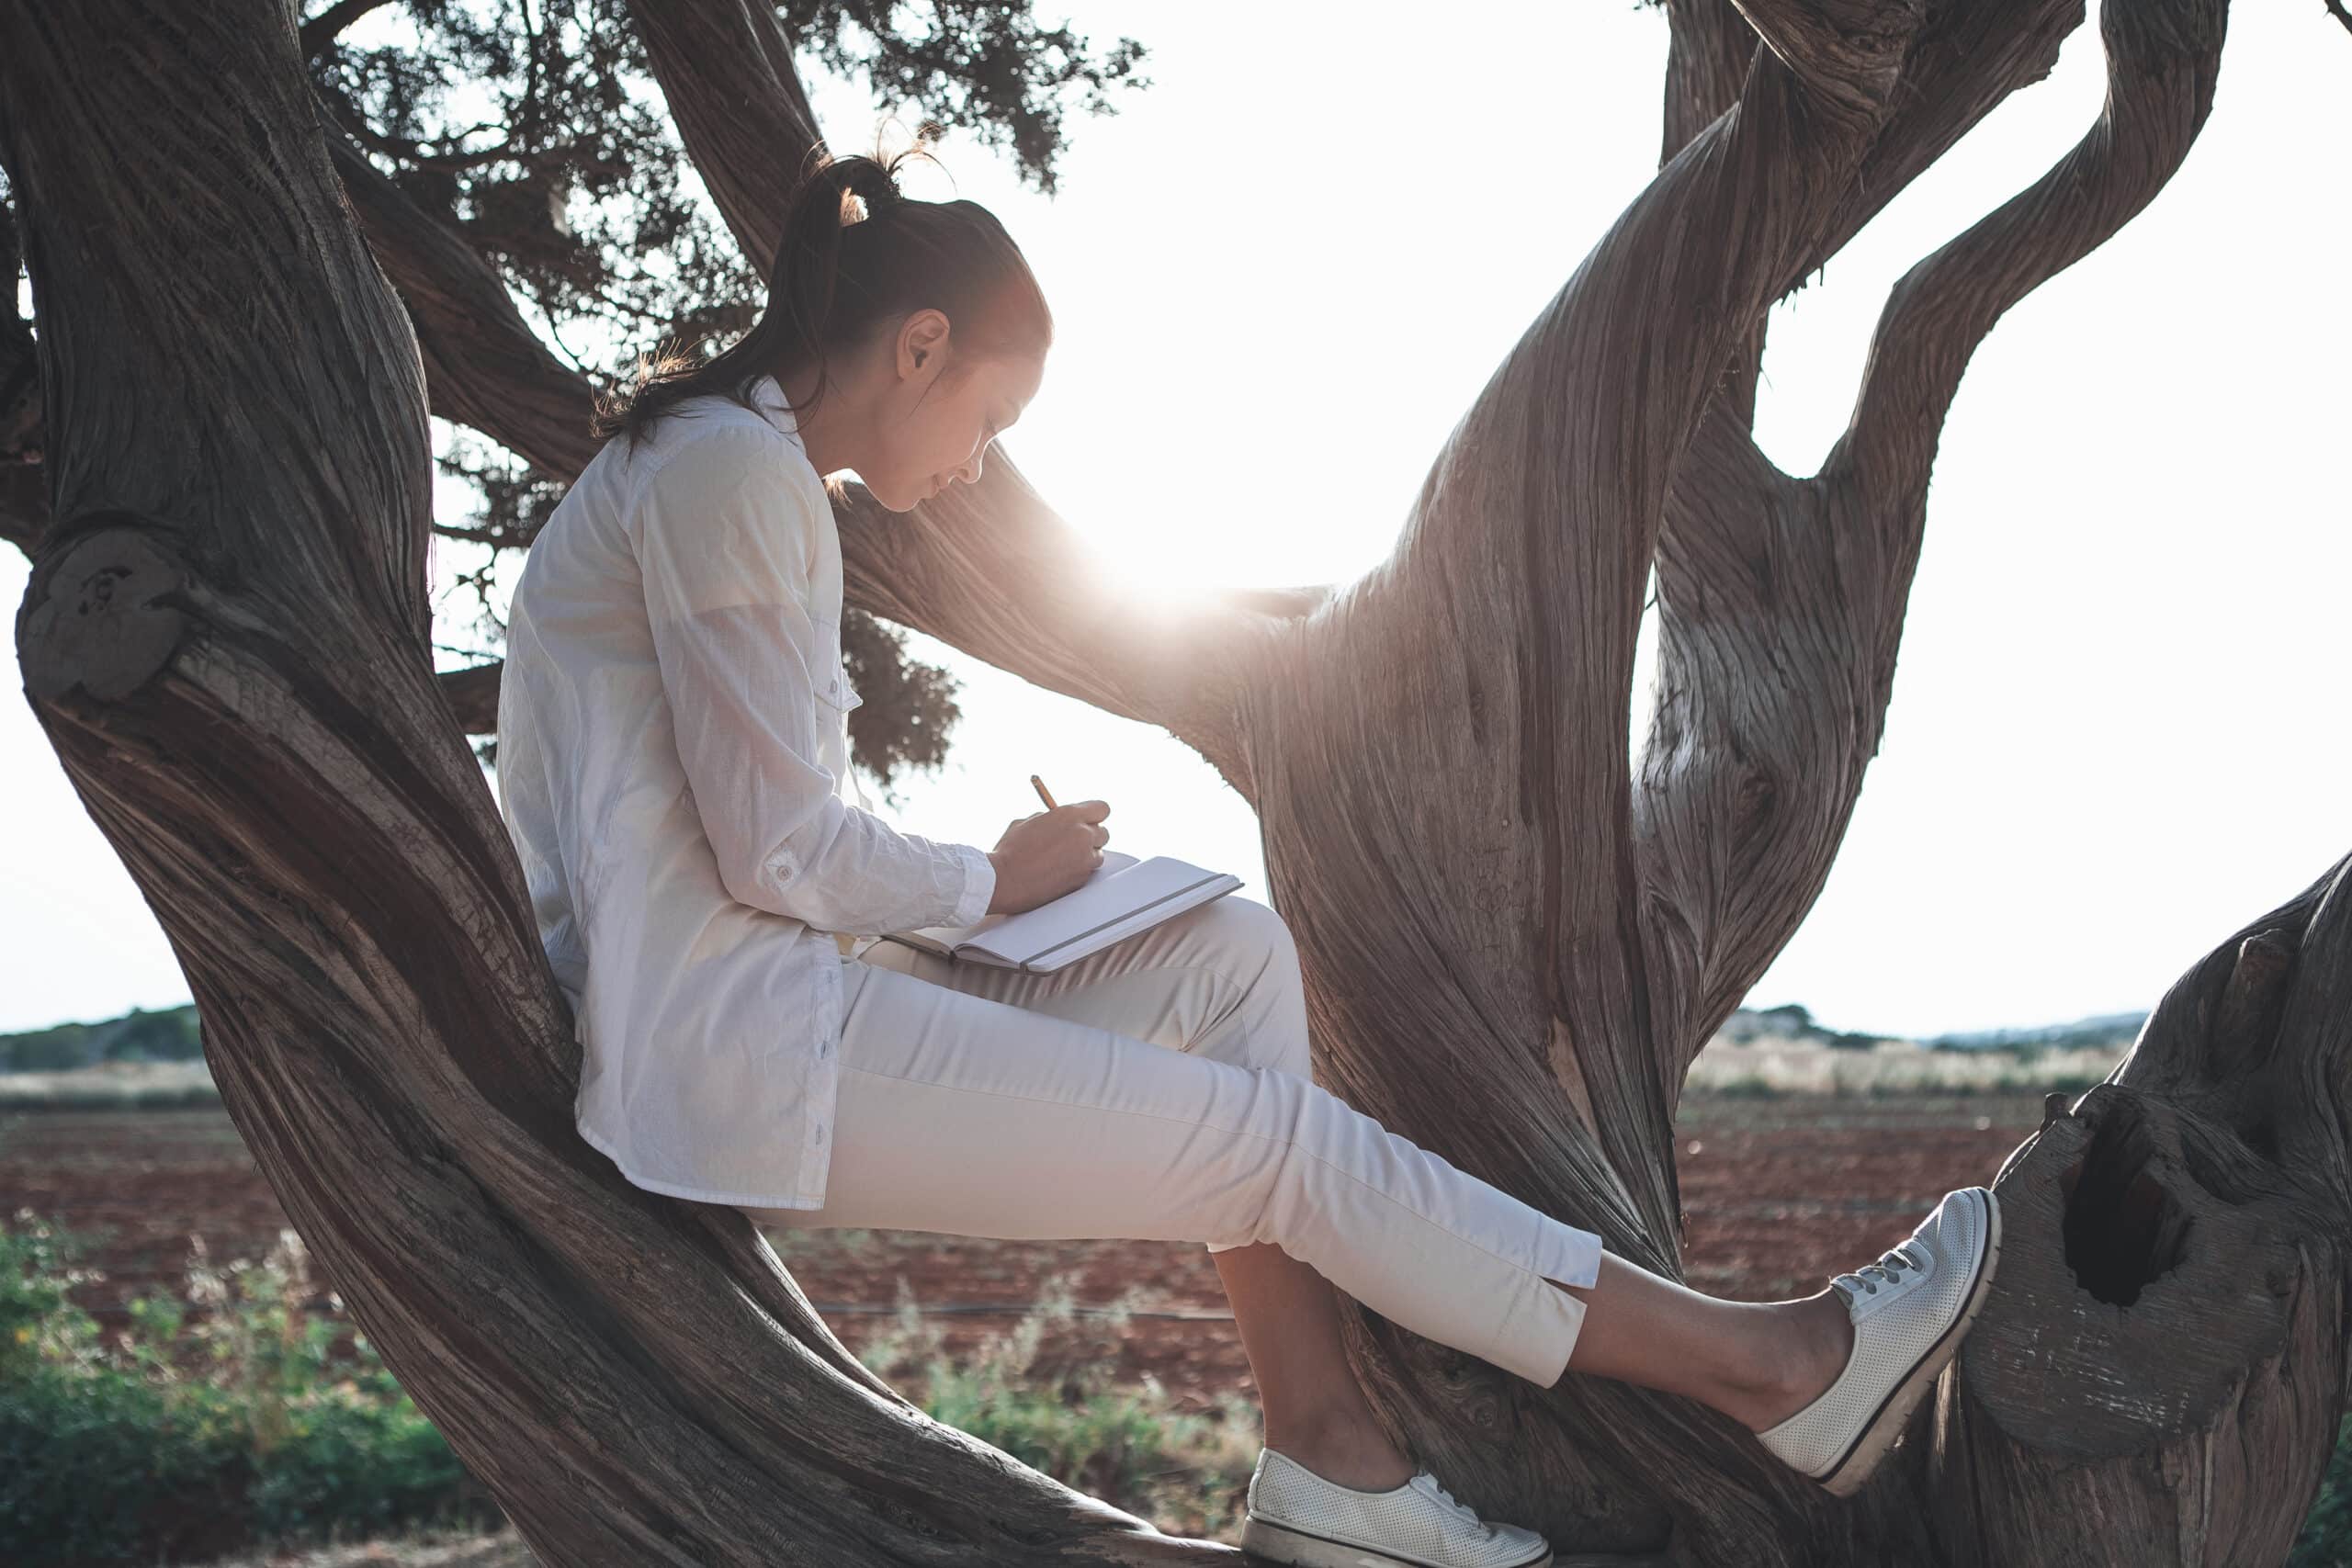 Woman in white writing while sitting on a low-lying tree.